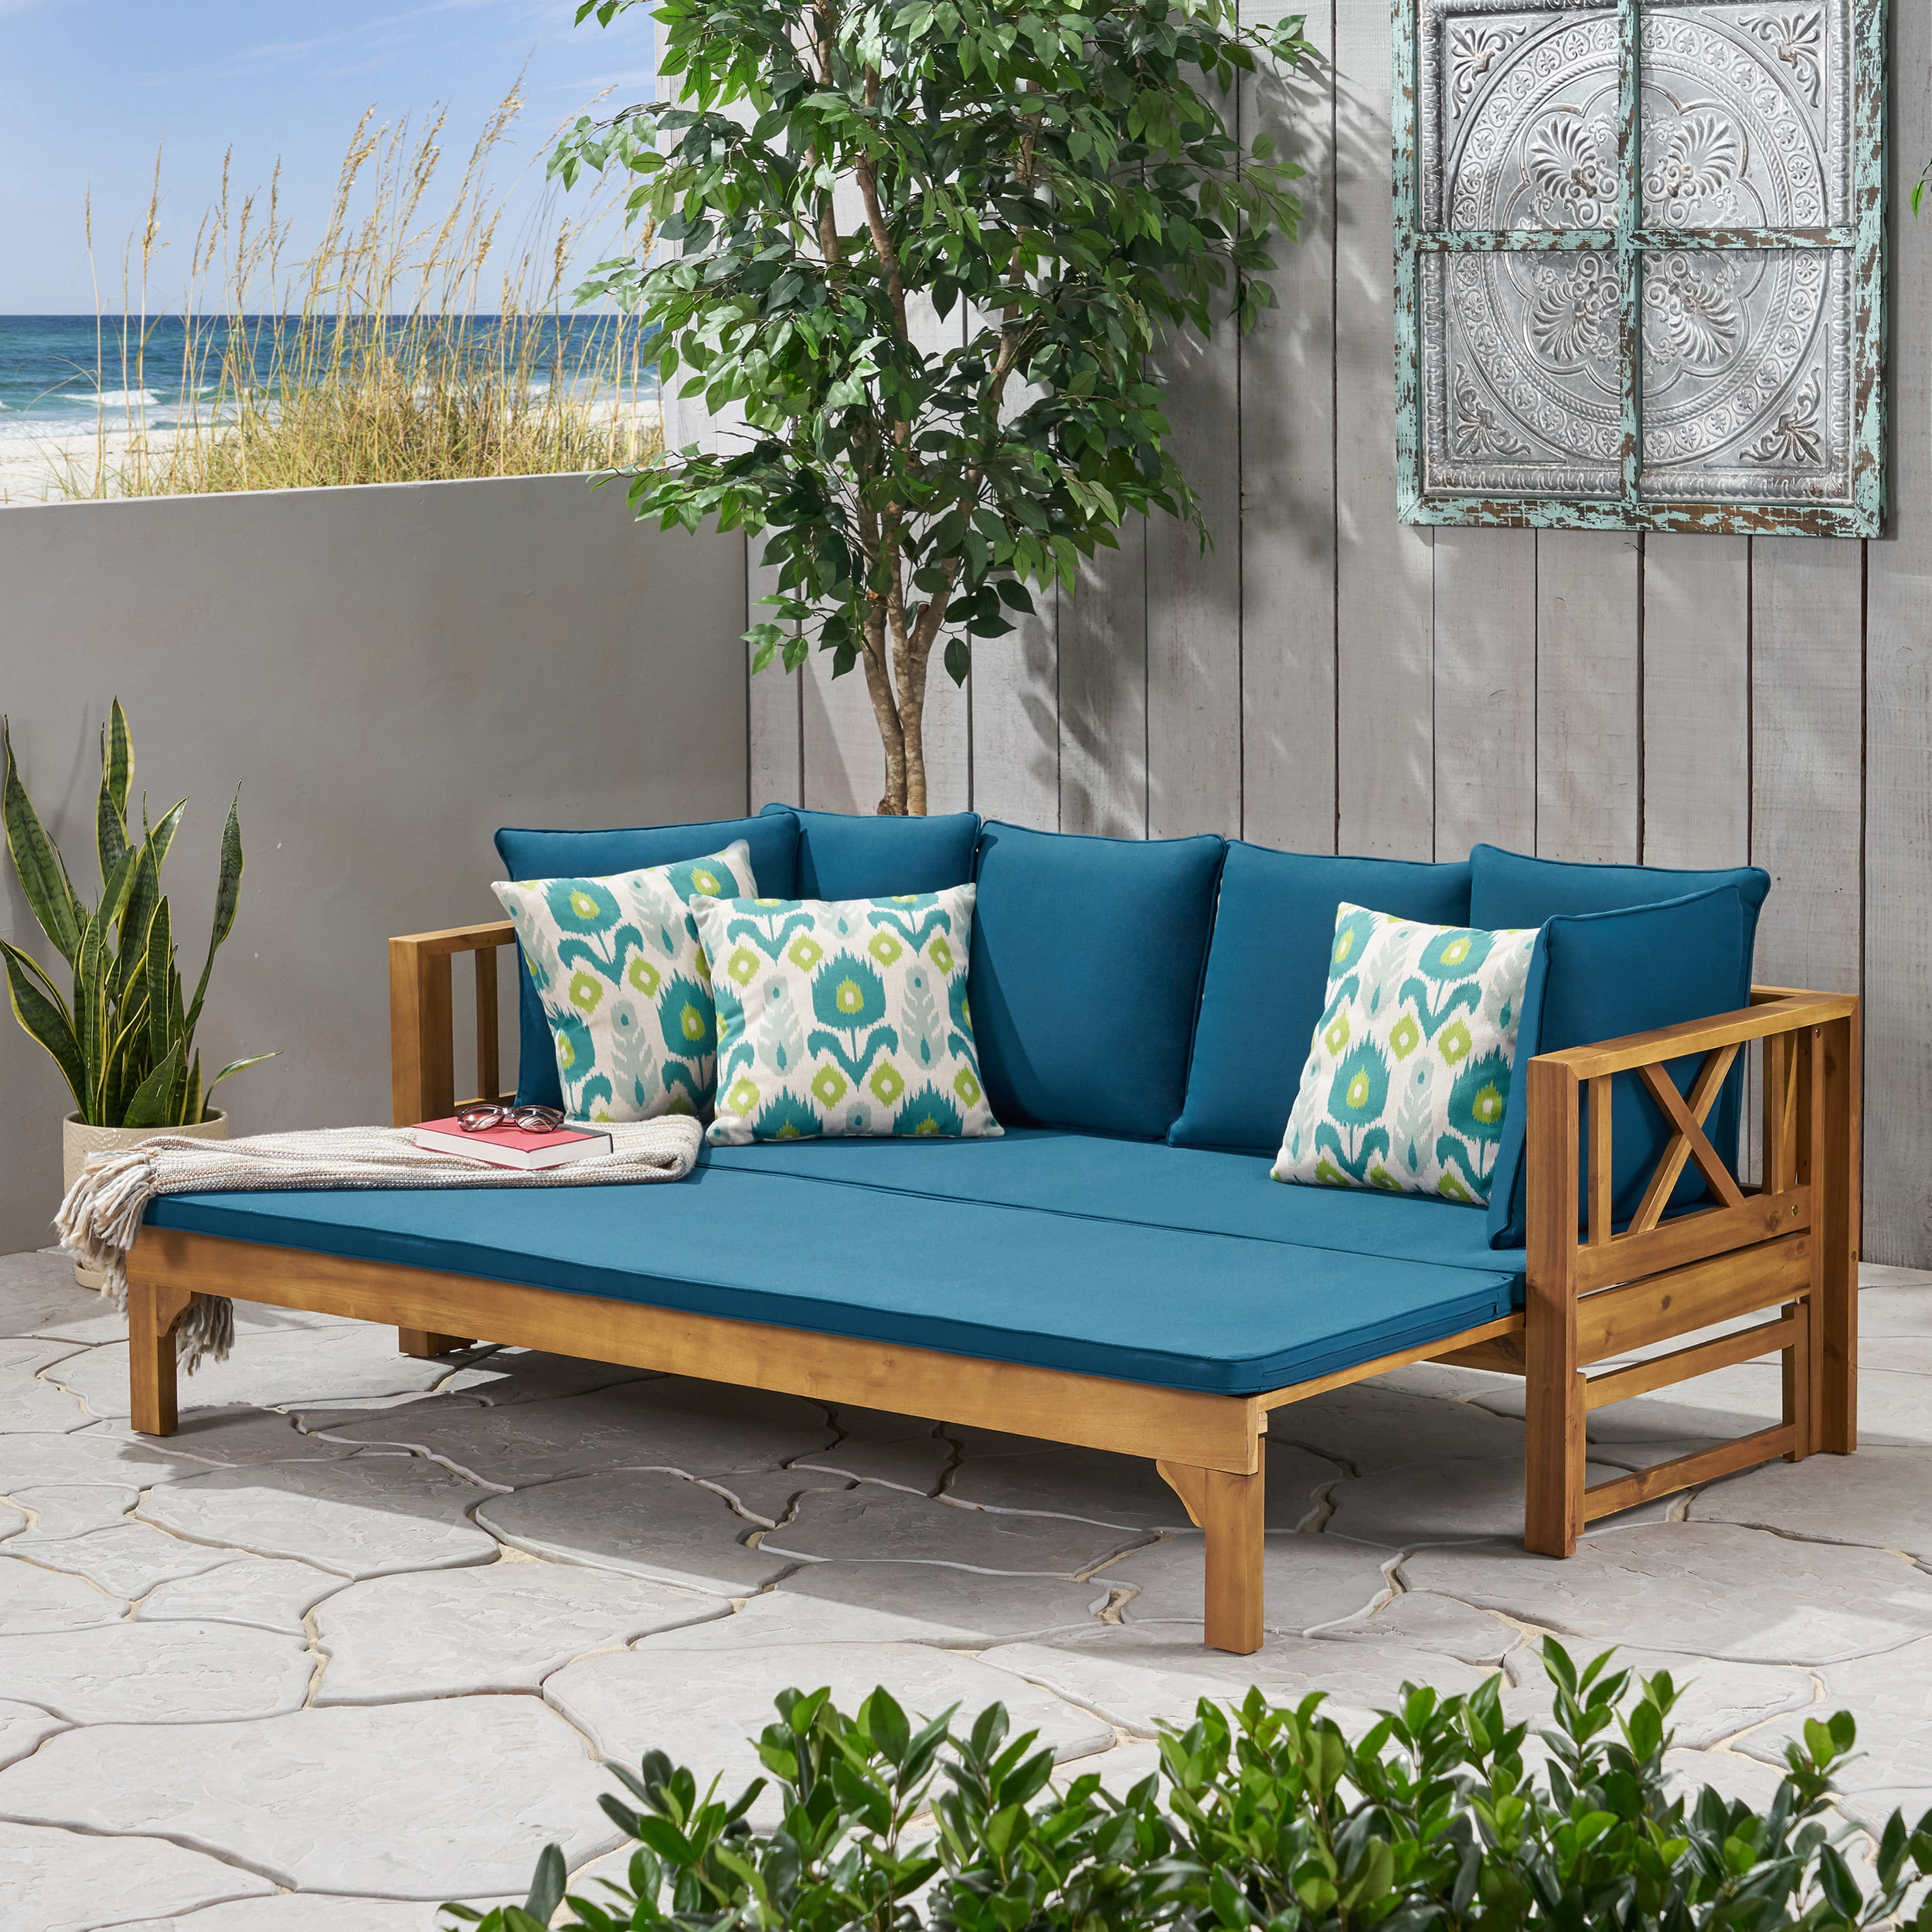 GDF Dark Sofa, Wood Extendable Acacia Outdoor Camille Teak and Daybed Teal Studio